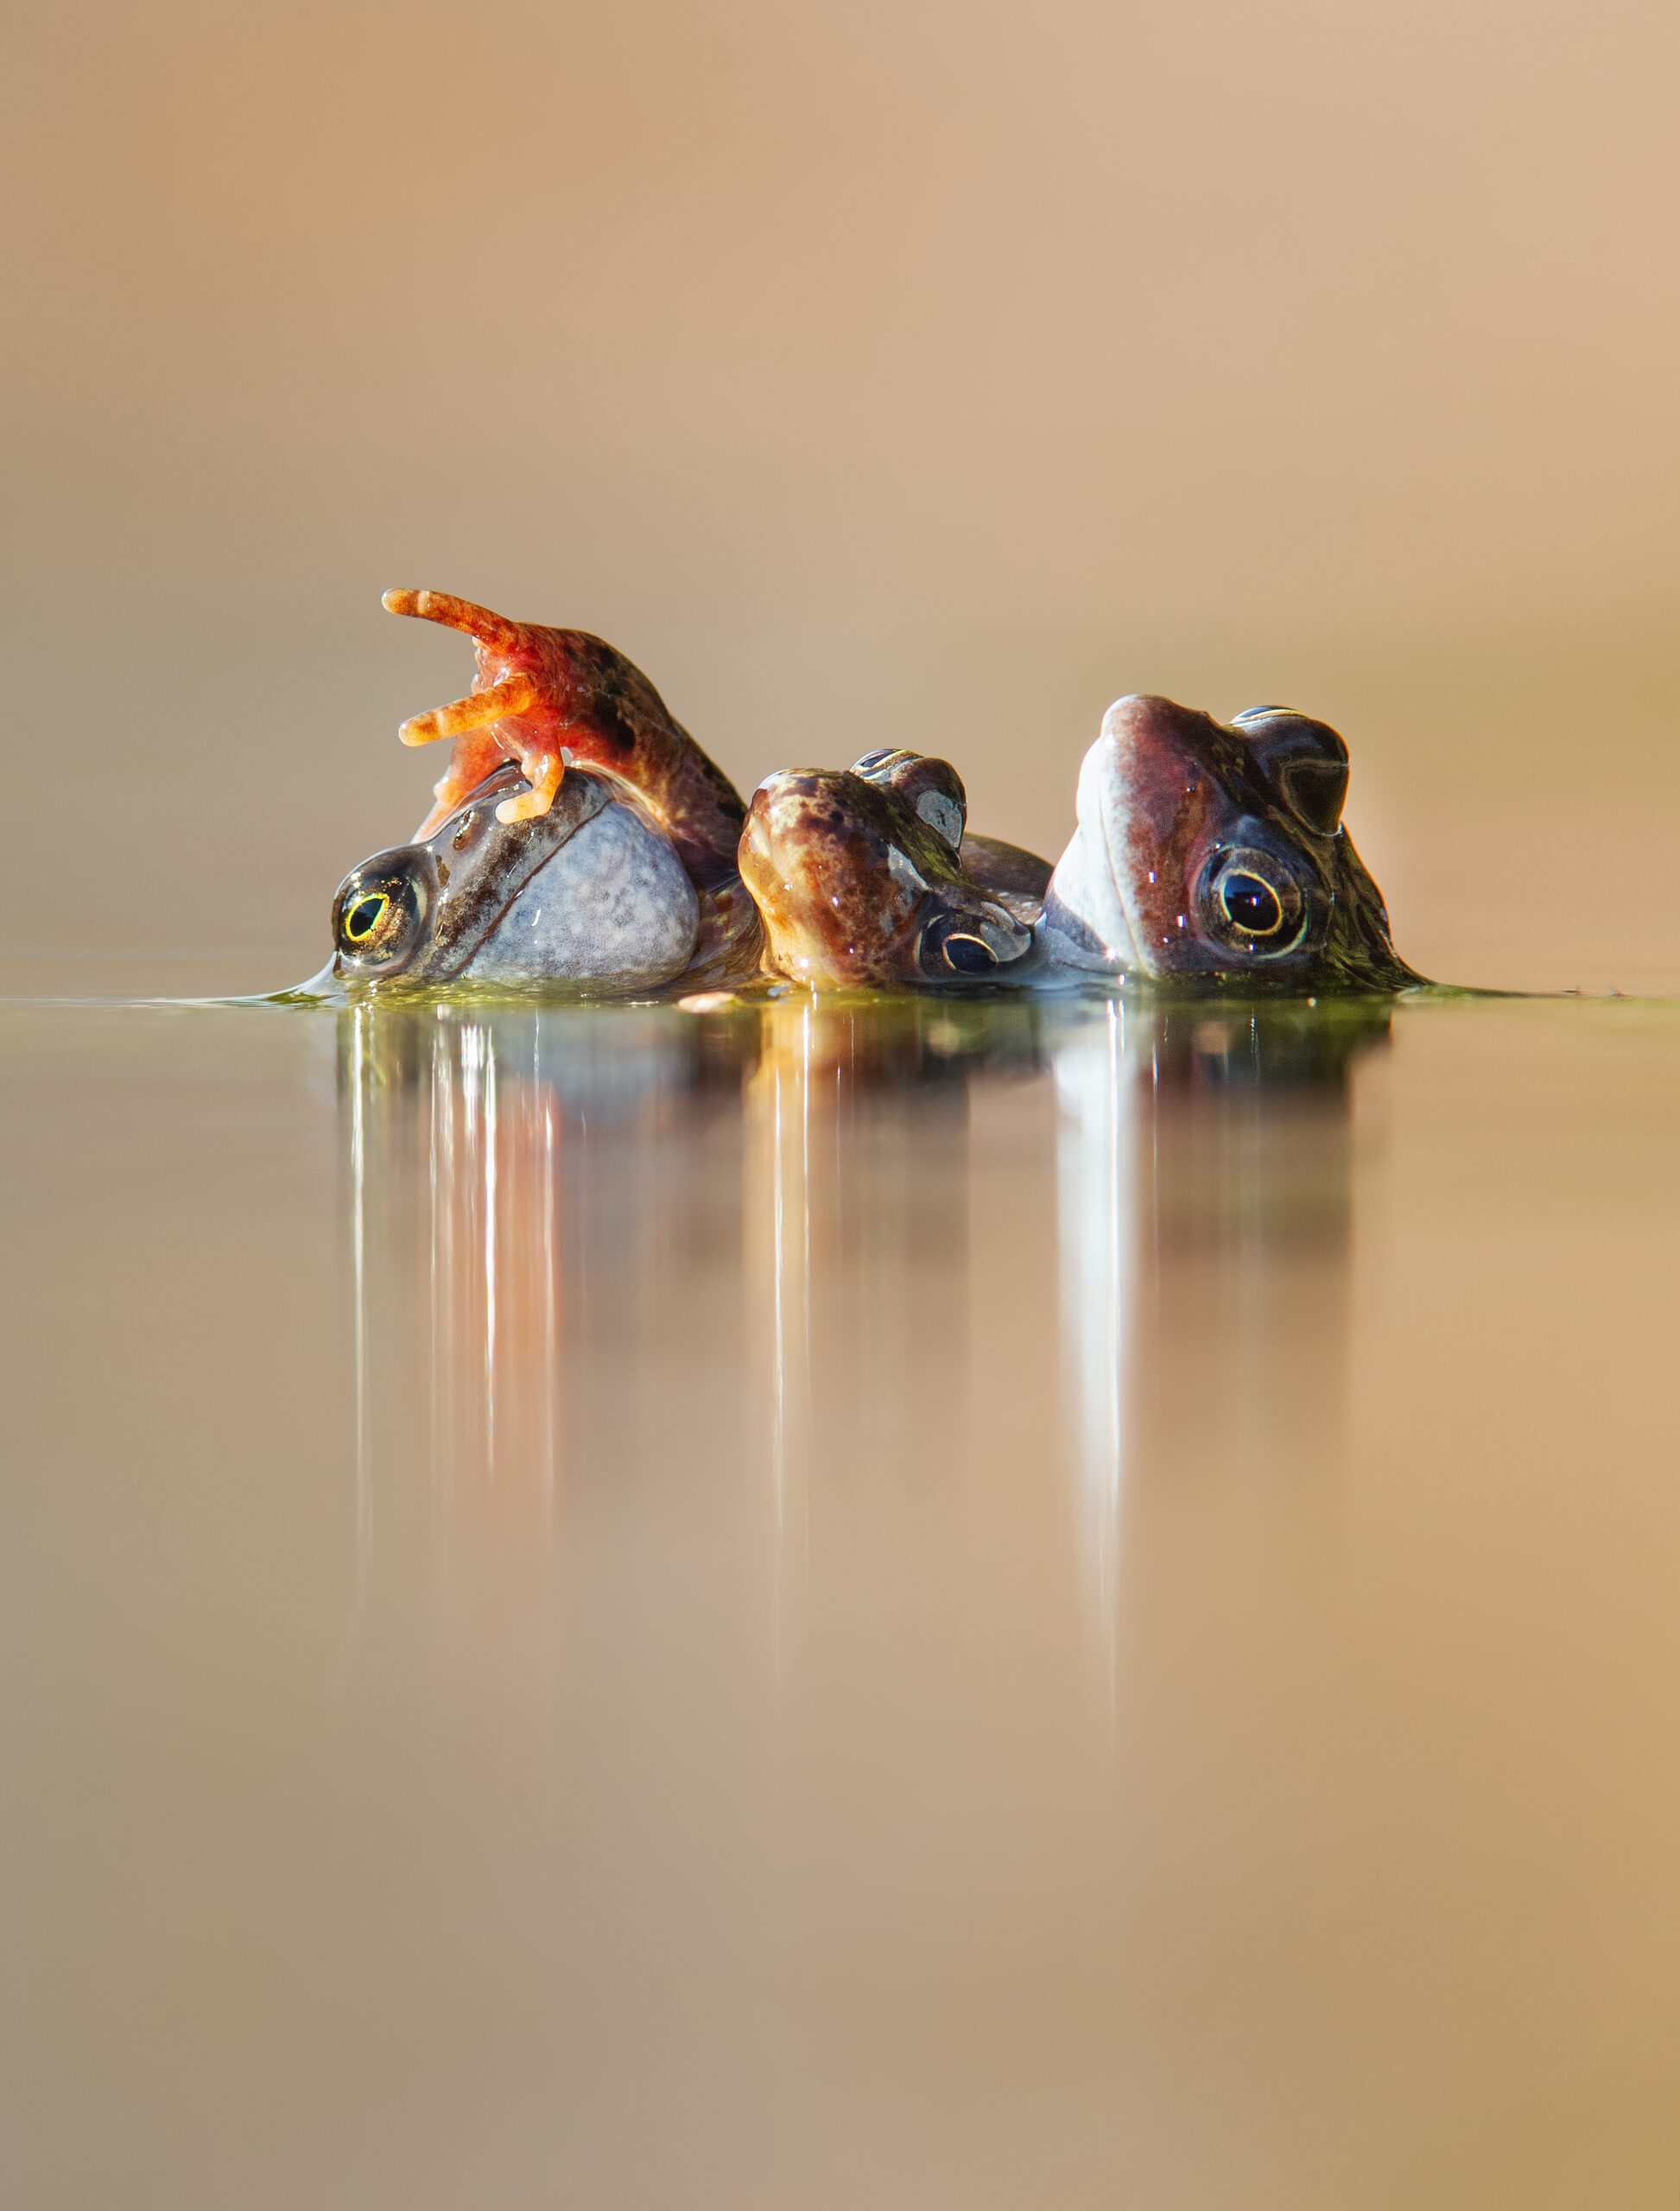 three frogs sit close together in the water with their head and shoulders poking out above the surface